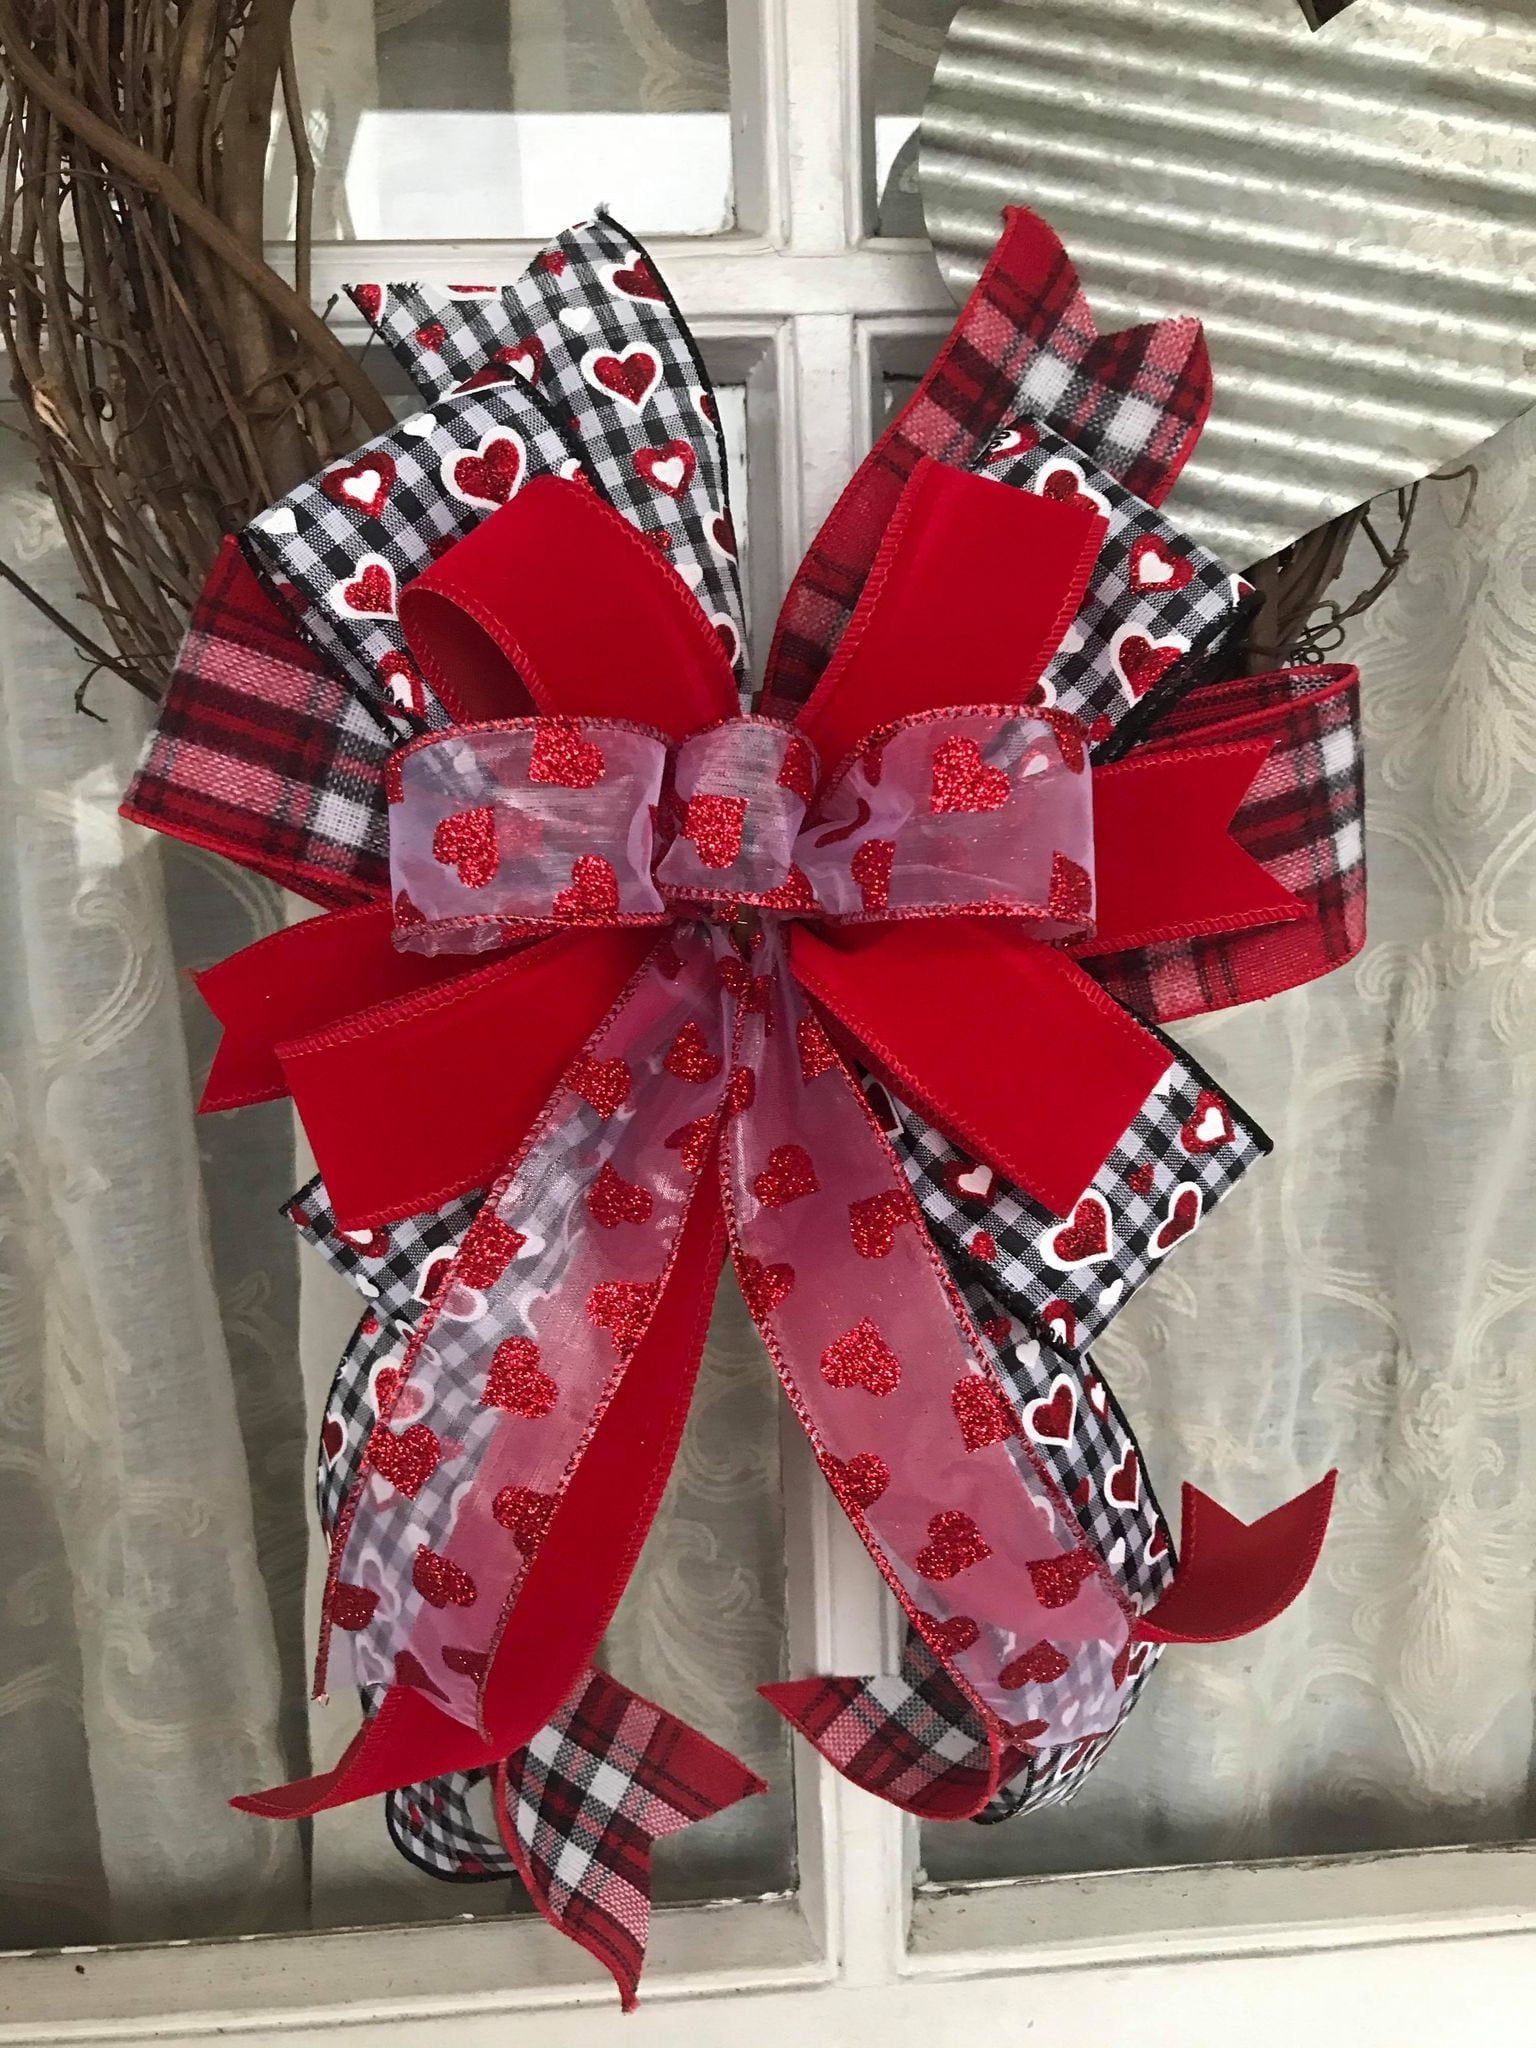 Valentines Day Wreath Decorations, Burlap Heart Shaped Wreath with Buffalo  Plaid Bows for Front Door Farmhouse Valentine's Day Decorations Party  Supplies 